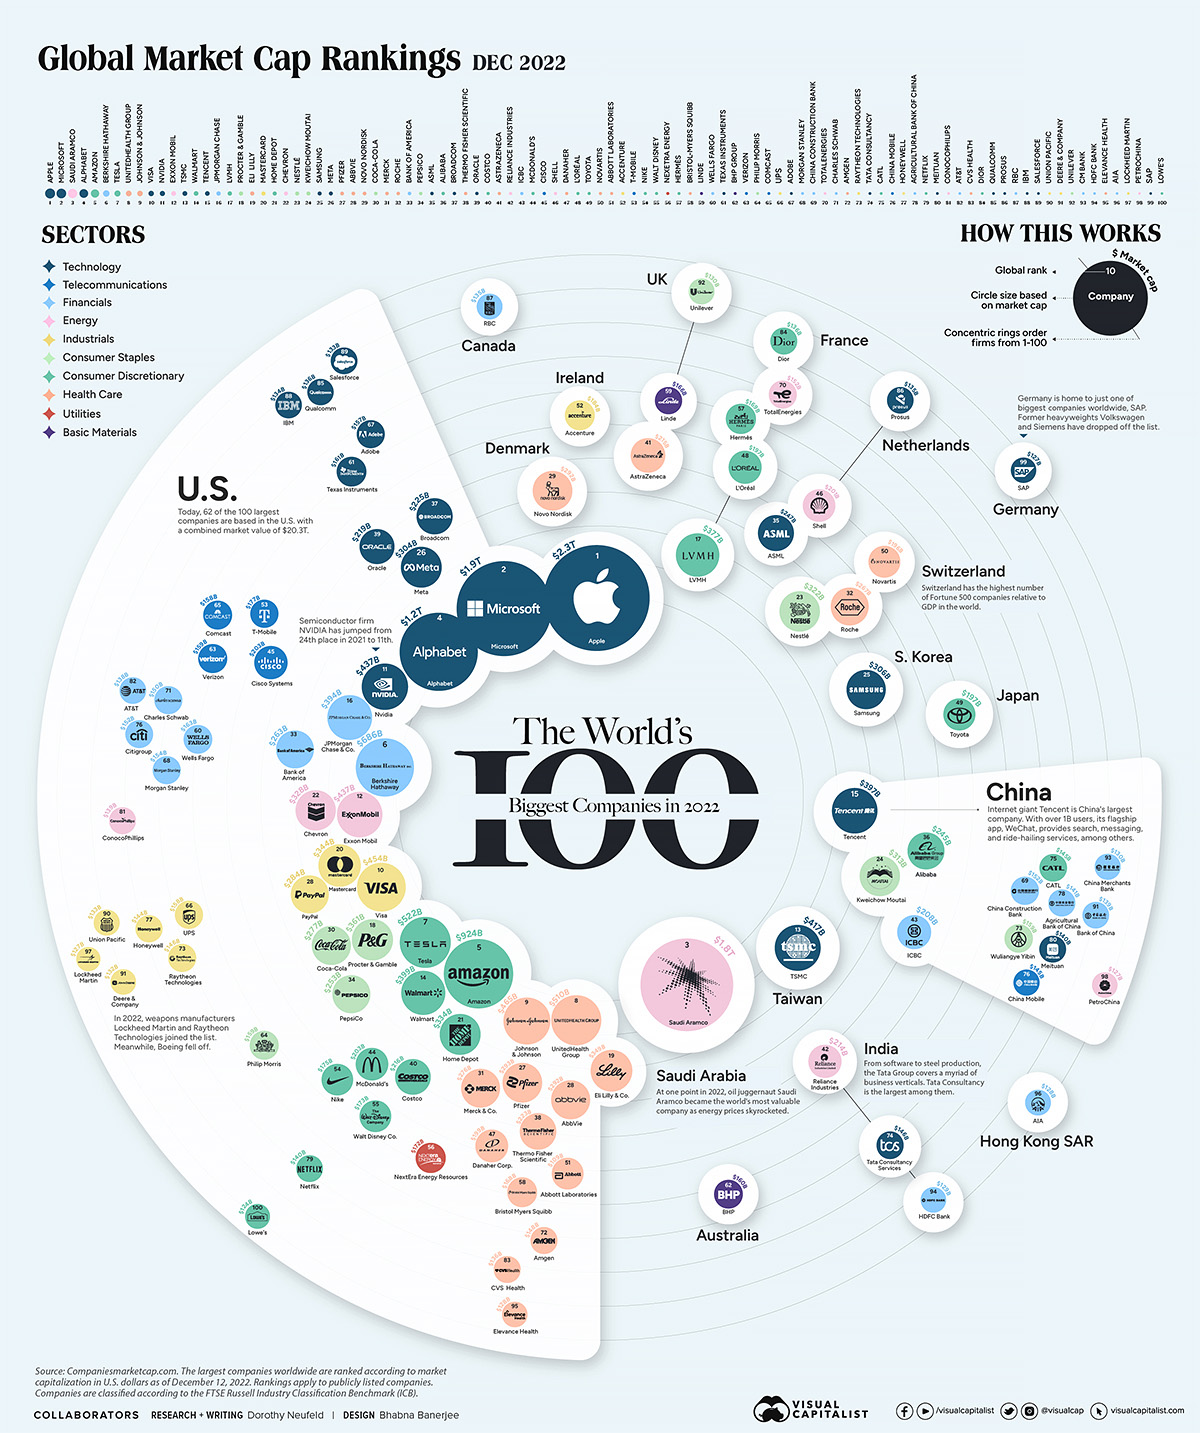 The 100 Biggest Public Companies in the World based on their market capitalisation in 2022. Note the dominance of software and hardware: Apple, Microsoft, Alphabet (that’s Google), Facebook and Amazon. Visualisation by Bhabna Banerjee and Dorothy Neufeld at the visualcapitalist.com, including a higher resolution image (Neufeld 2022) You can also see the same data in tabular form at financecharts.com/screener/biggest